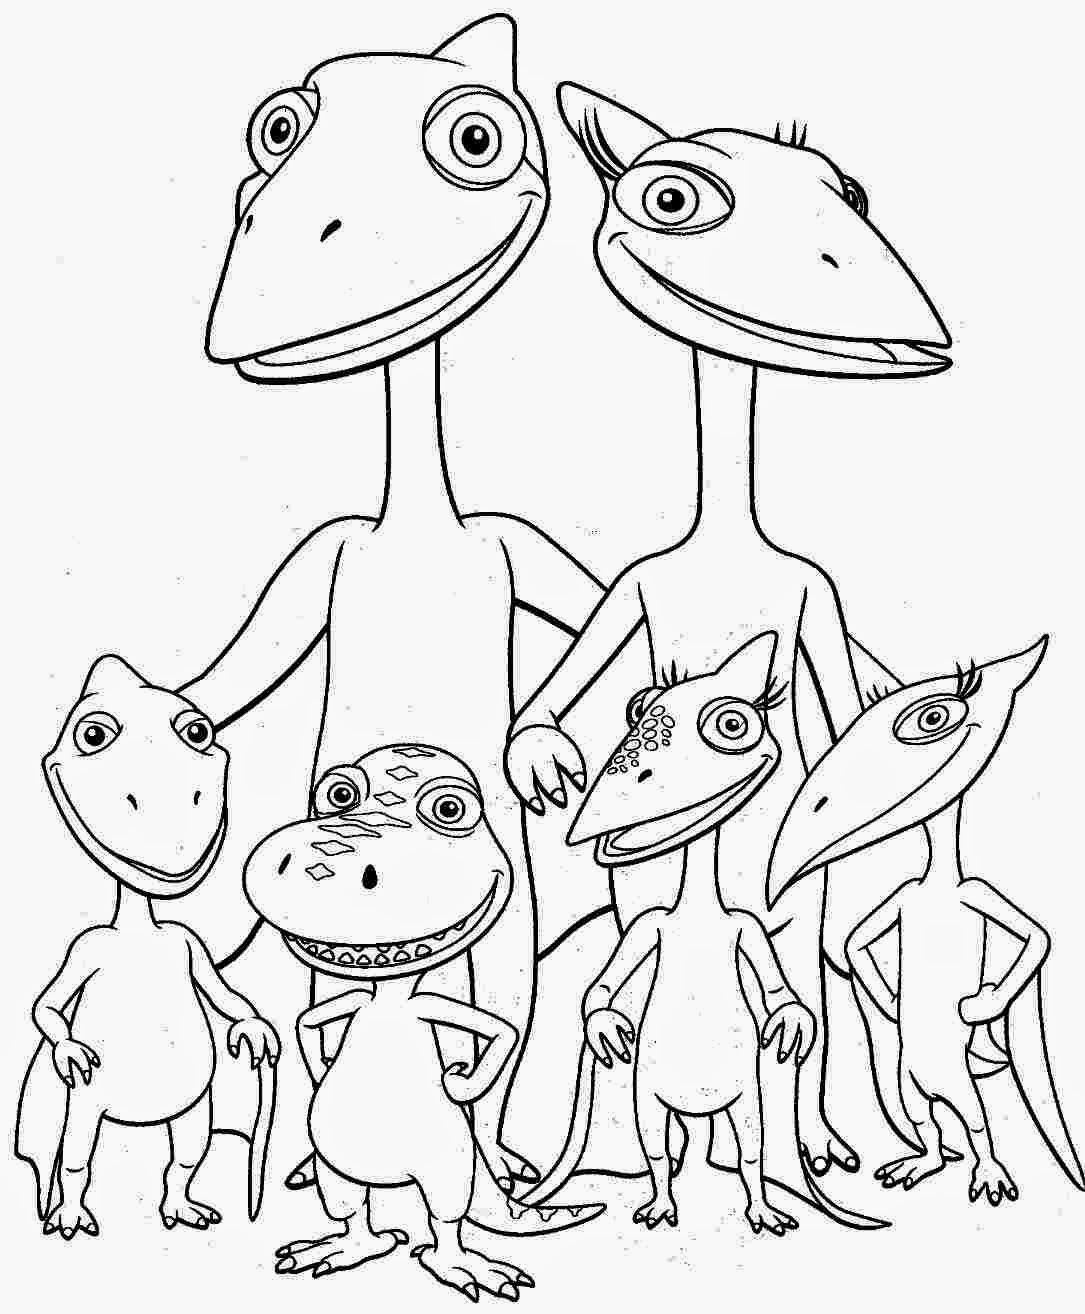 Download Coloring Pages: Dinosaur Free Printable Coloring Pages